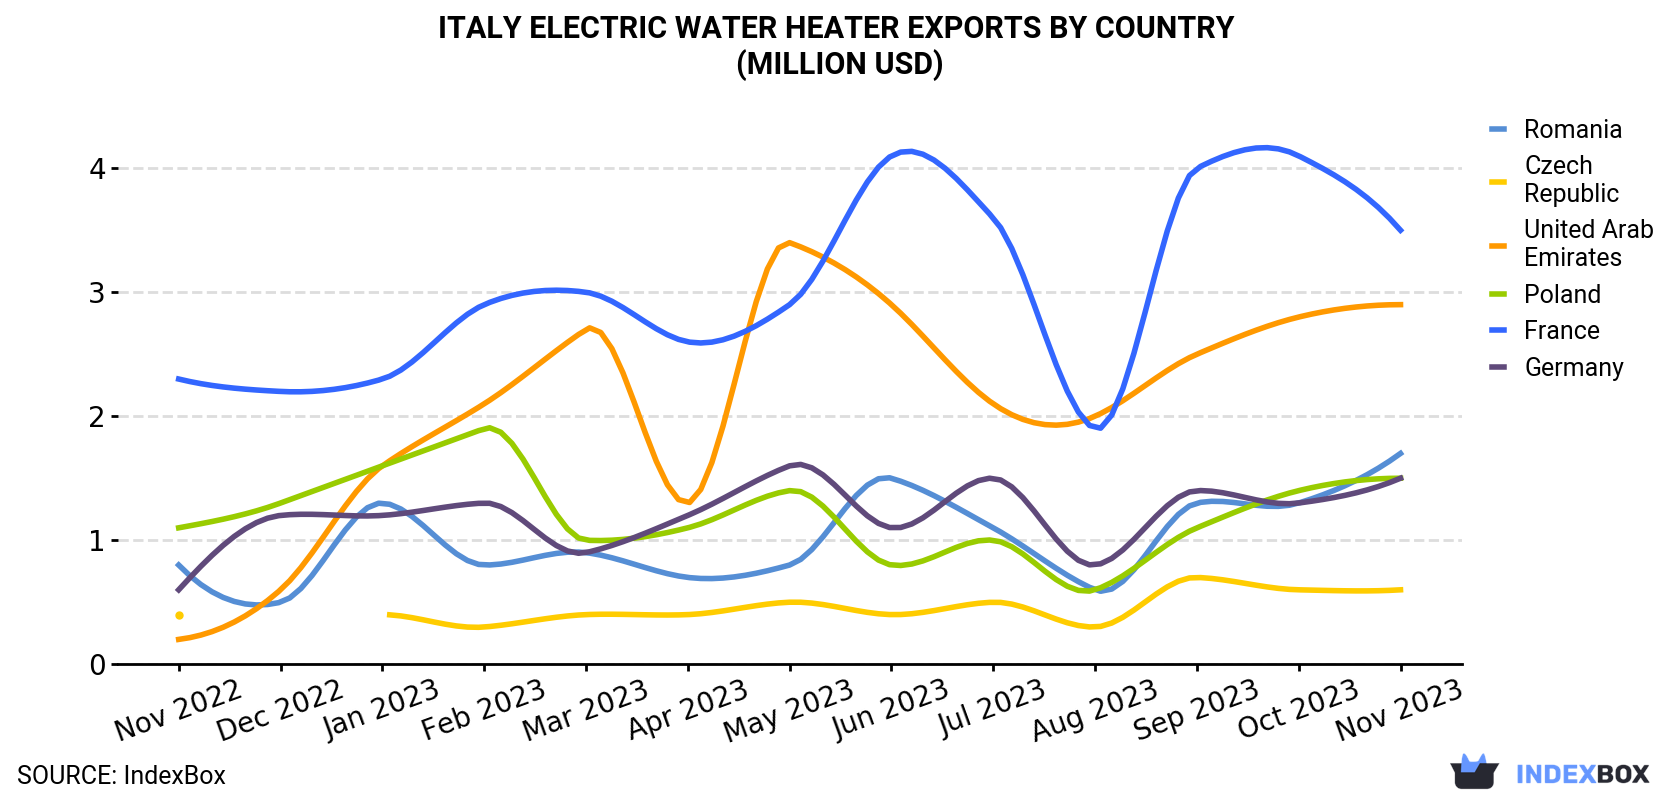 Italy Electric Water Heater Exports By Country (Million USD)